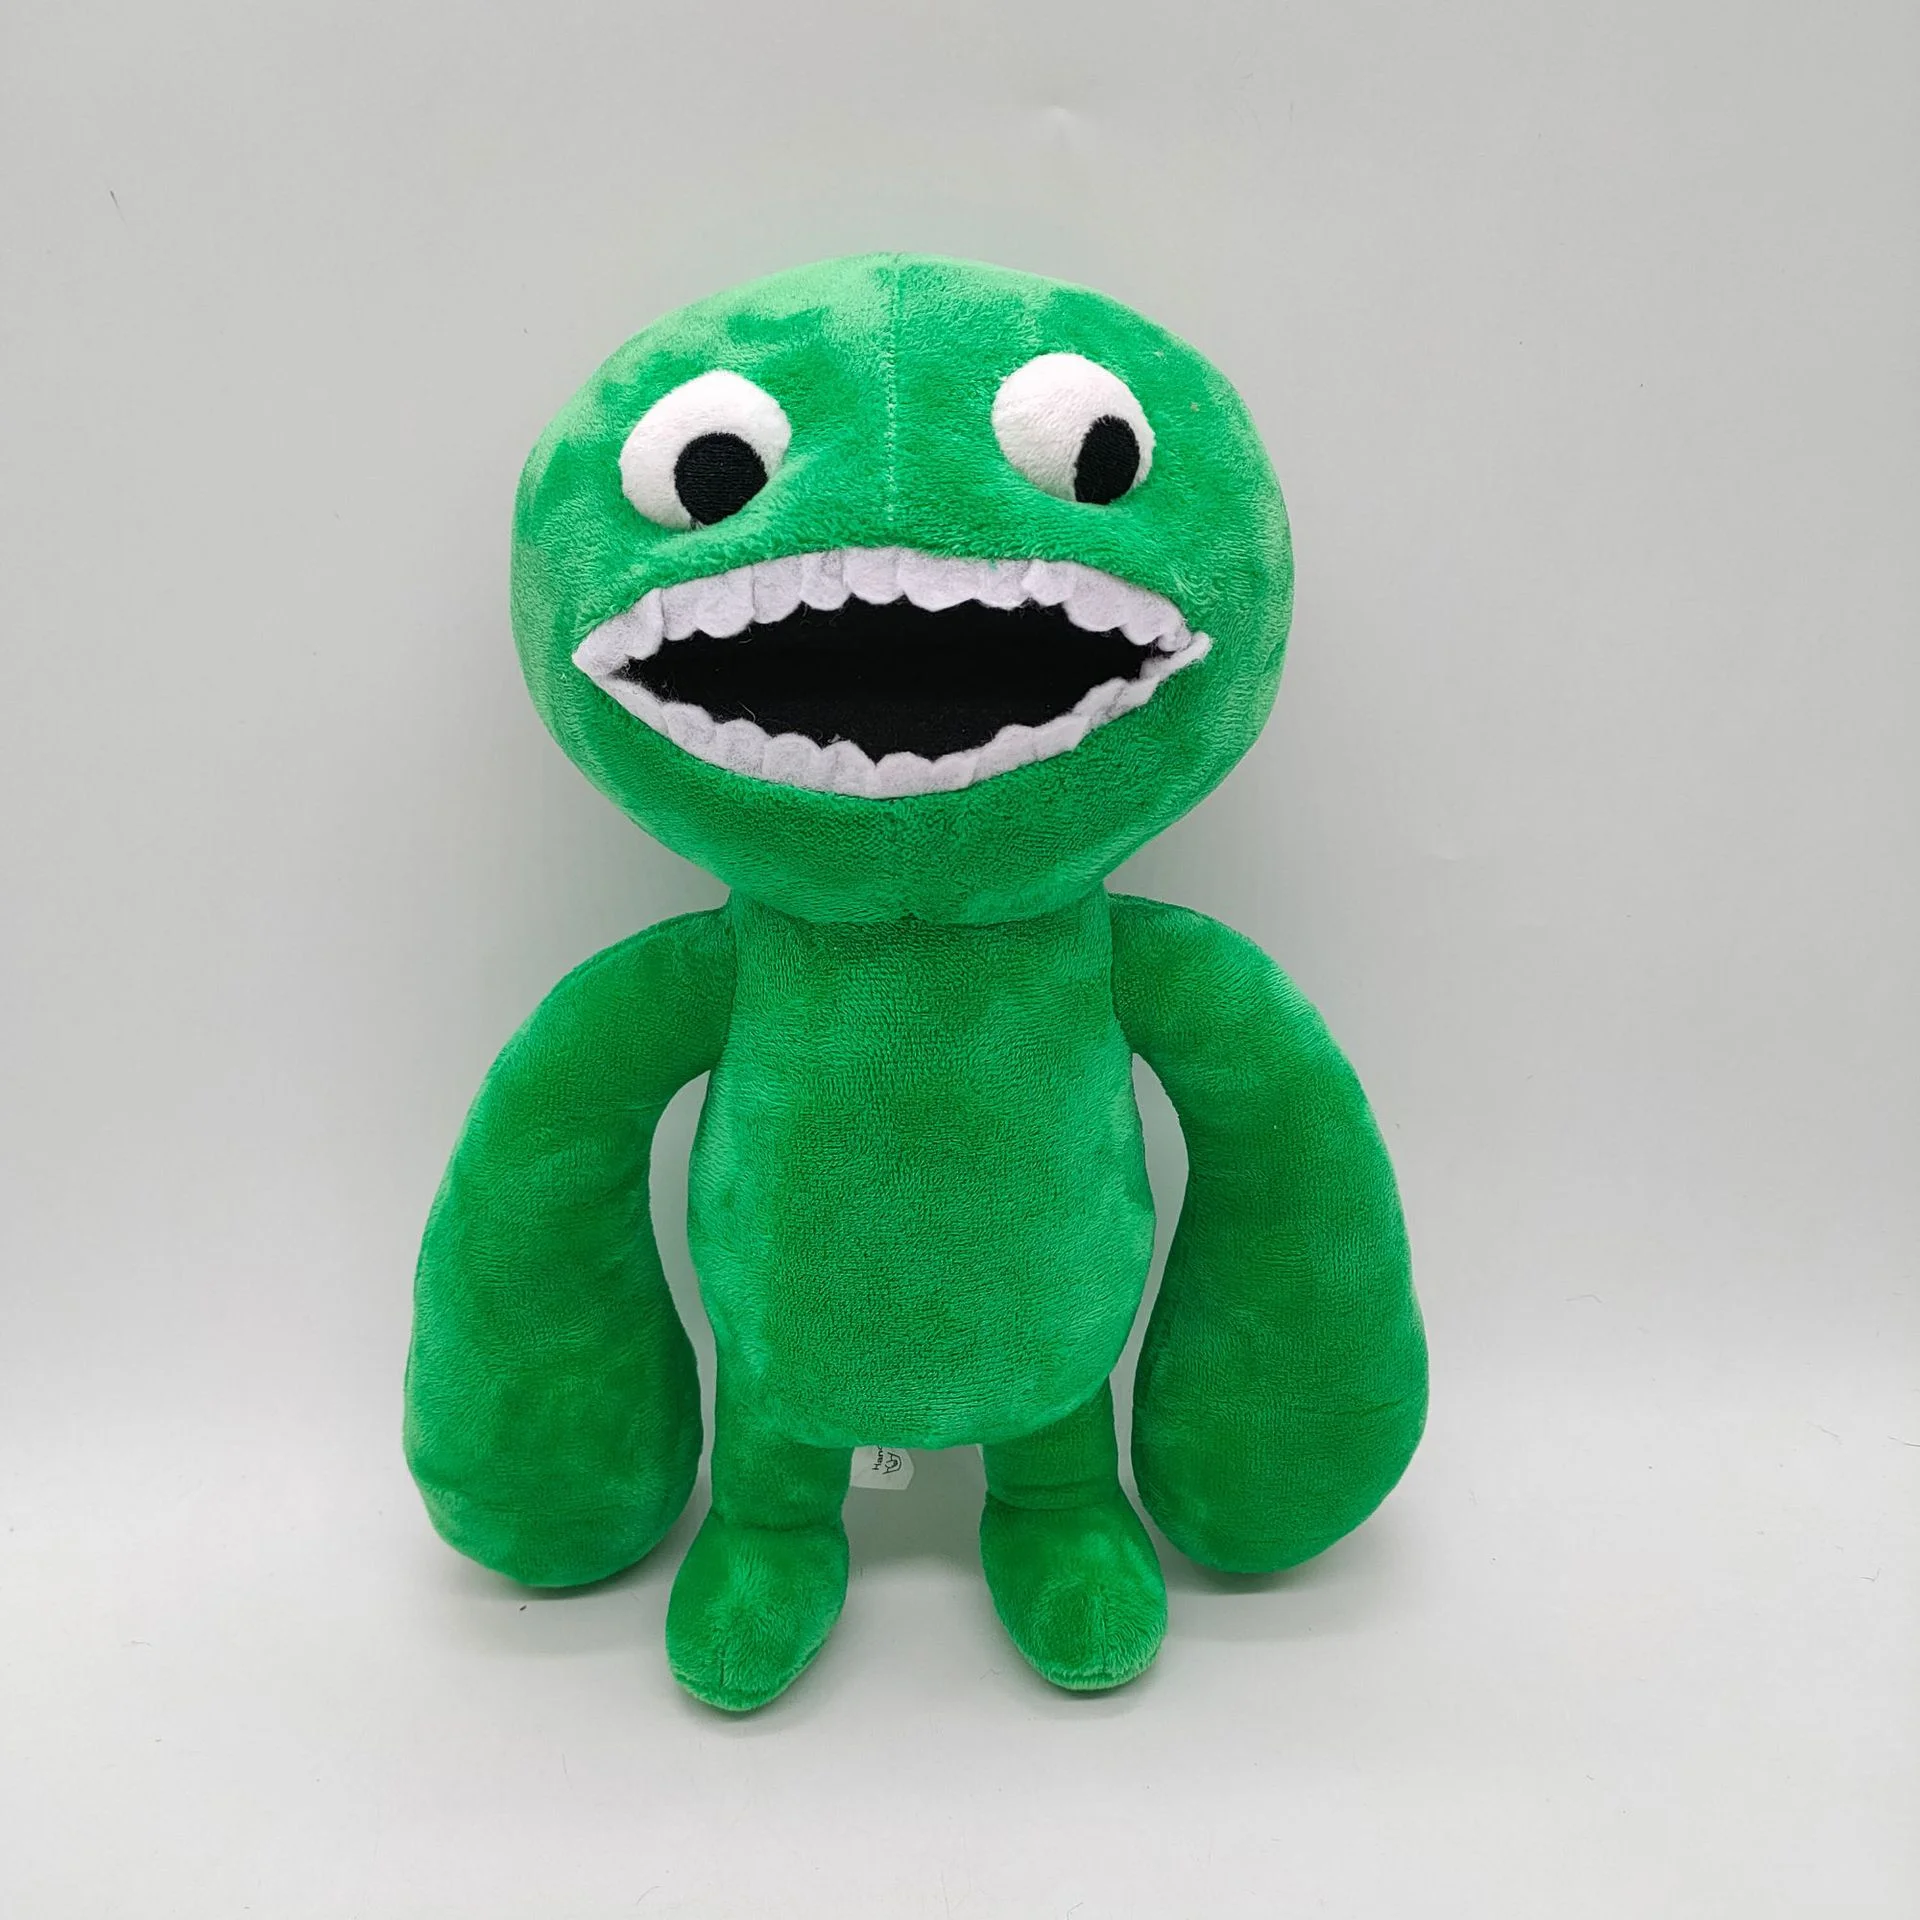 30CM Rainbow Friends Blue Monster Plush Toy Game Stuffed Plushie Doll All  Monsters Green Orange Wholesale Dropship Kids Gift